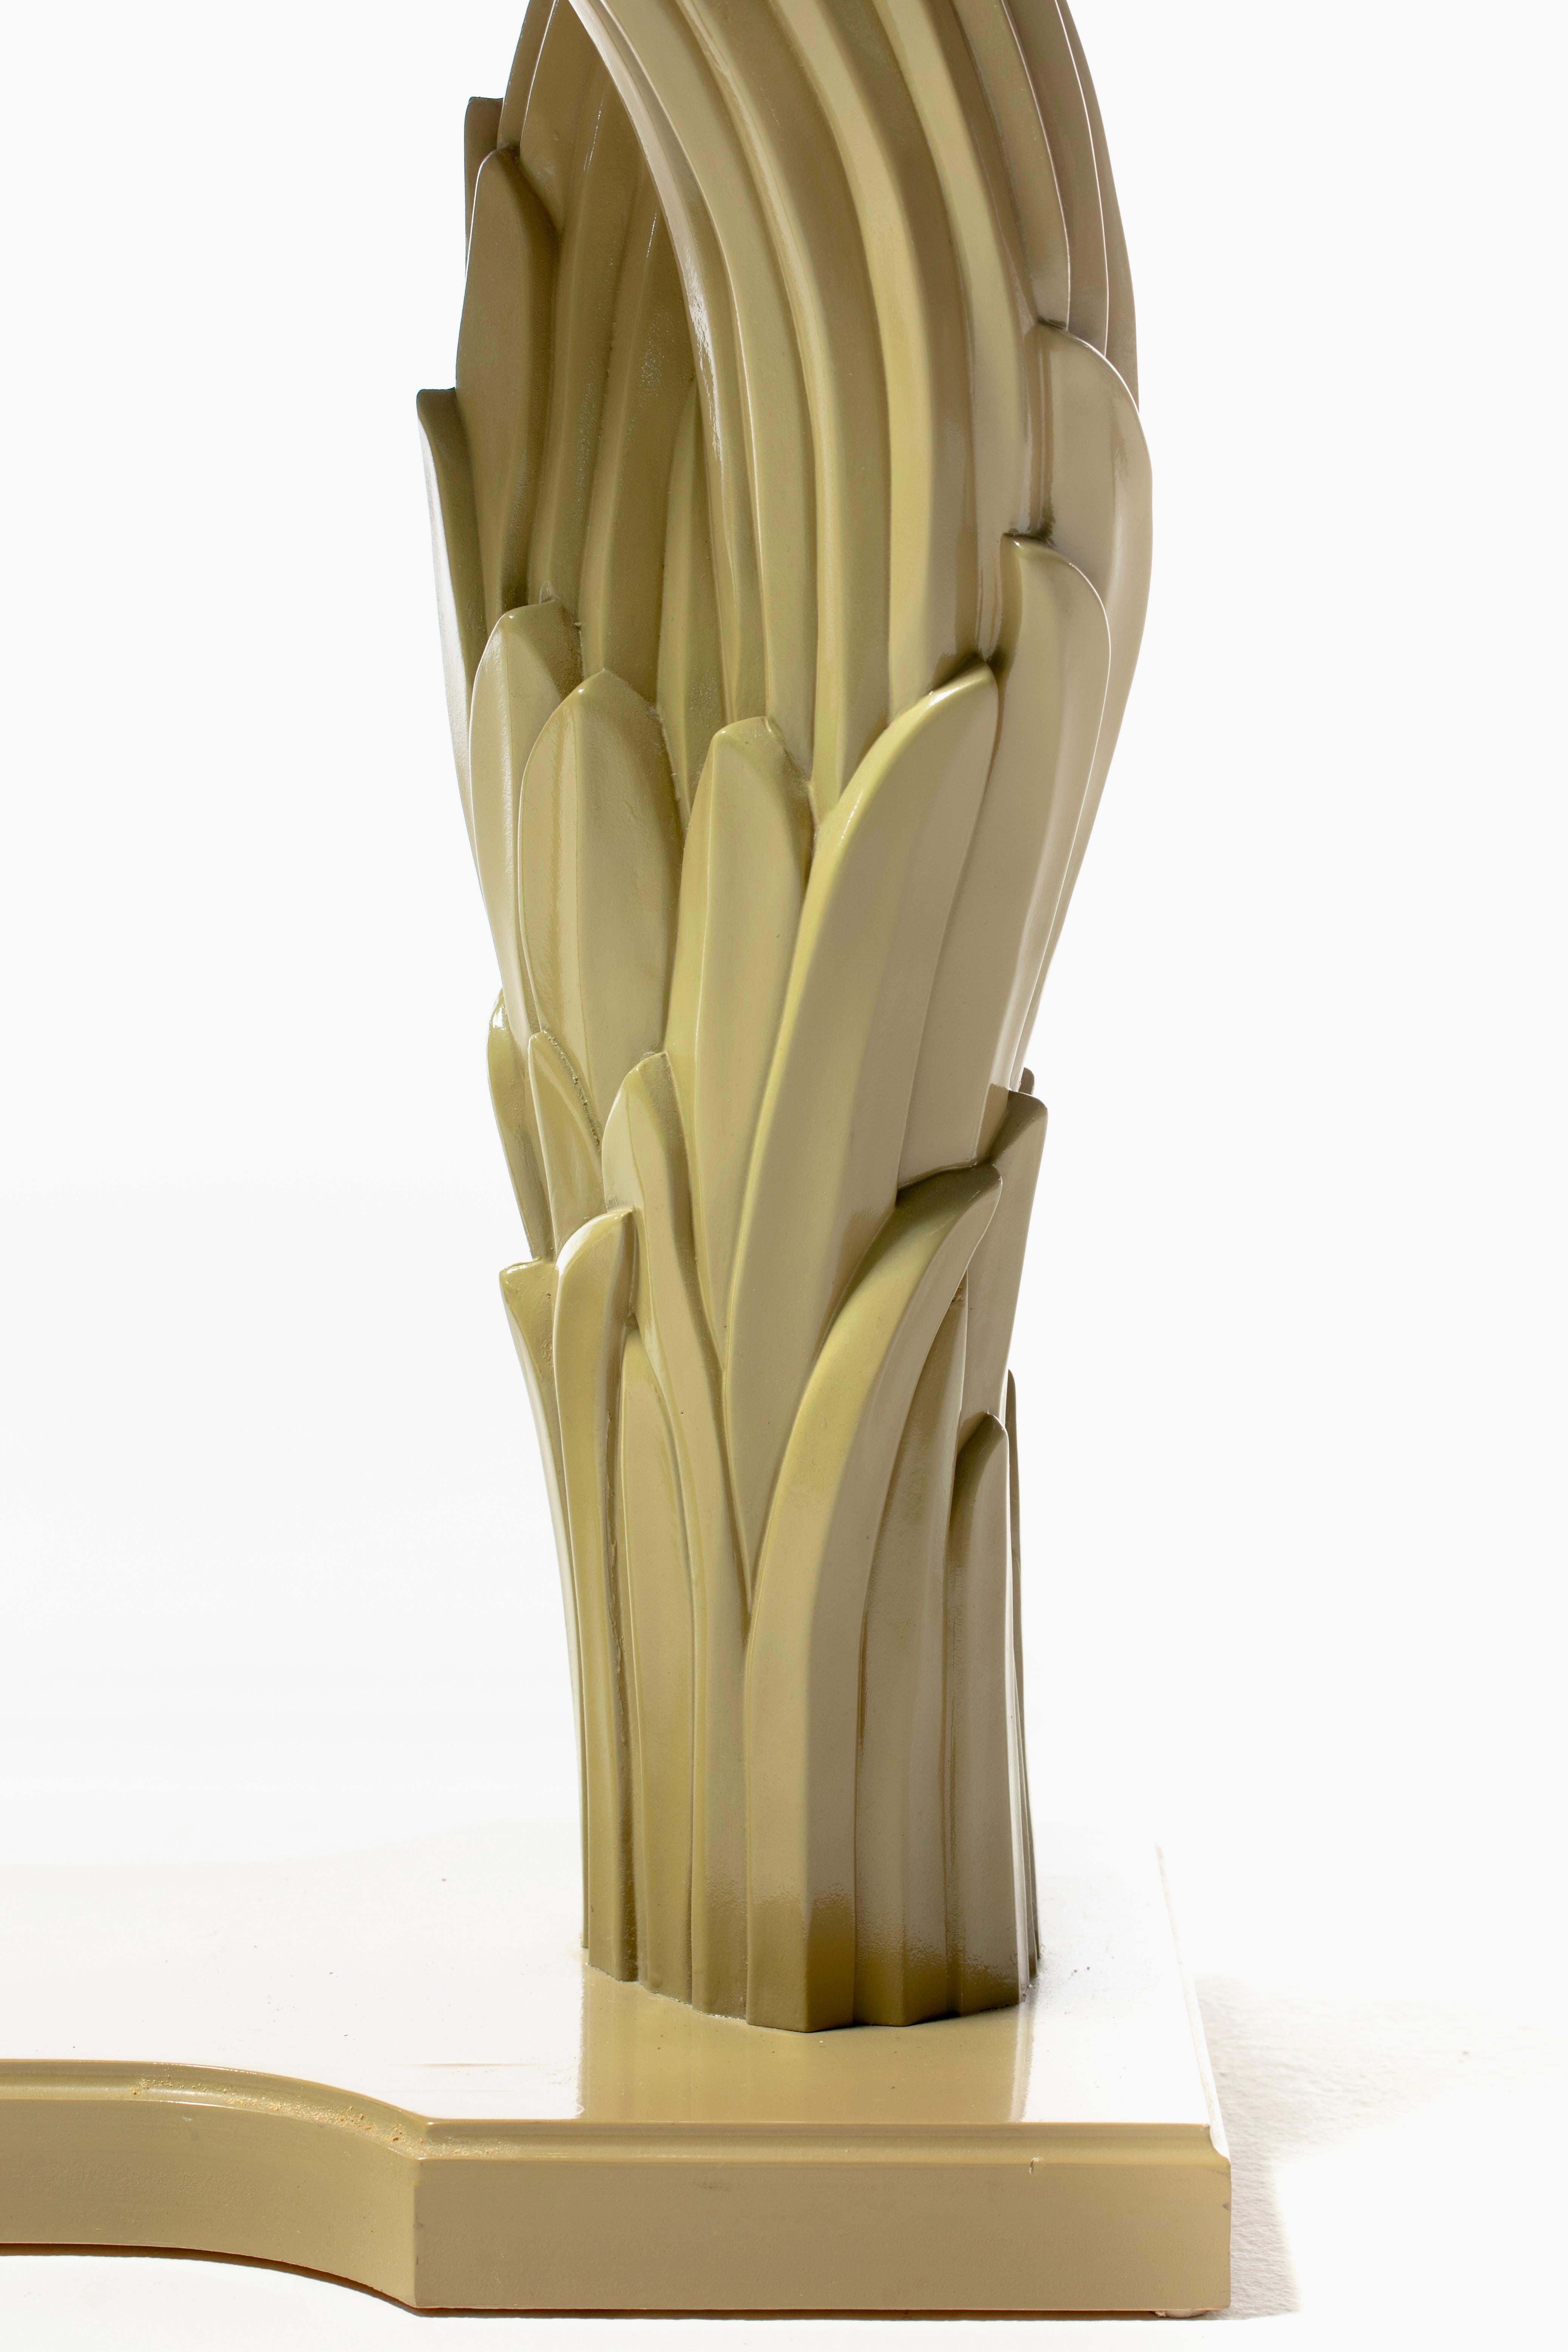 Art Deco Serge Roche Style Palm Leaf Console Lacquered in Almond Latte c. 1980 For Sale 6